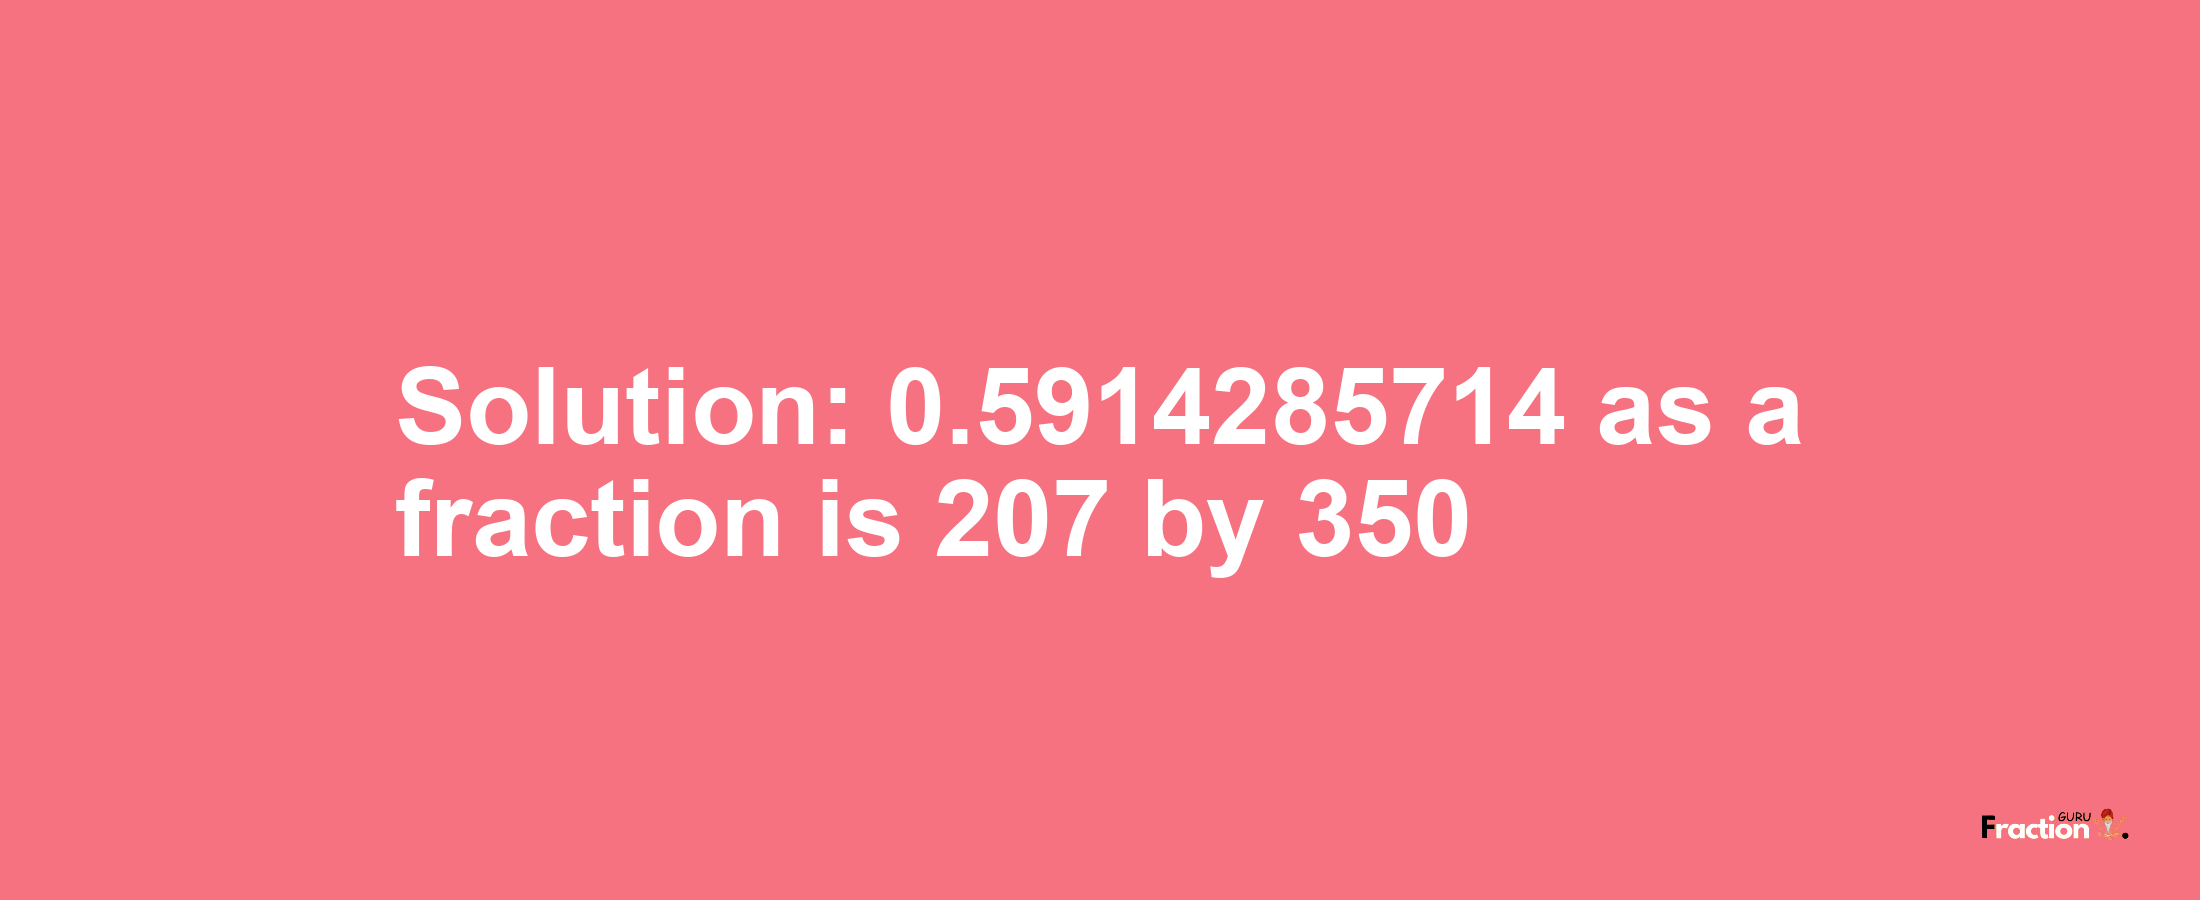 Solution:0.5914285714 as a fraction is 207/350